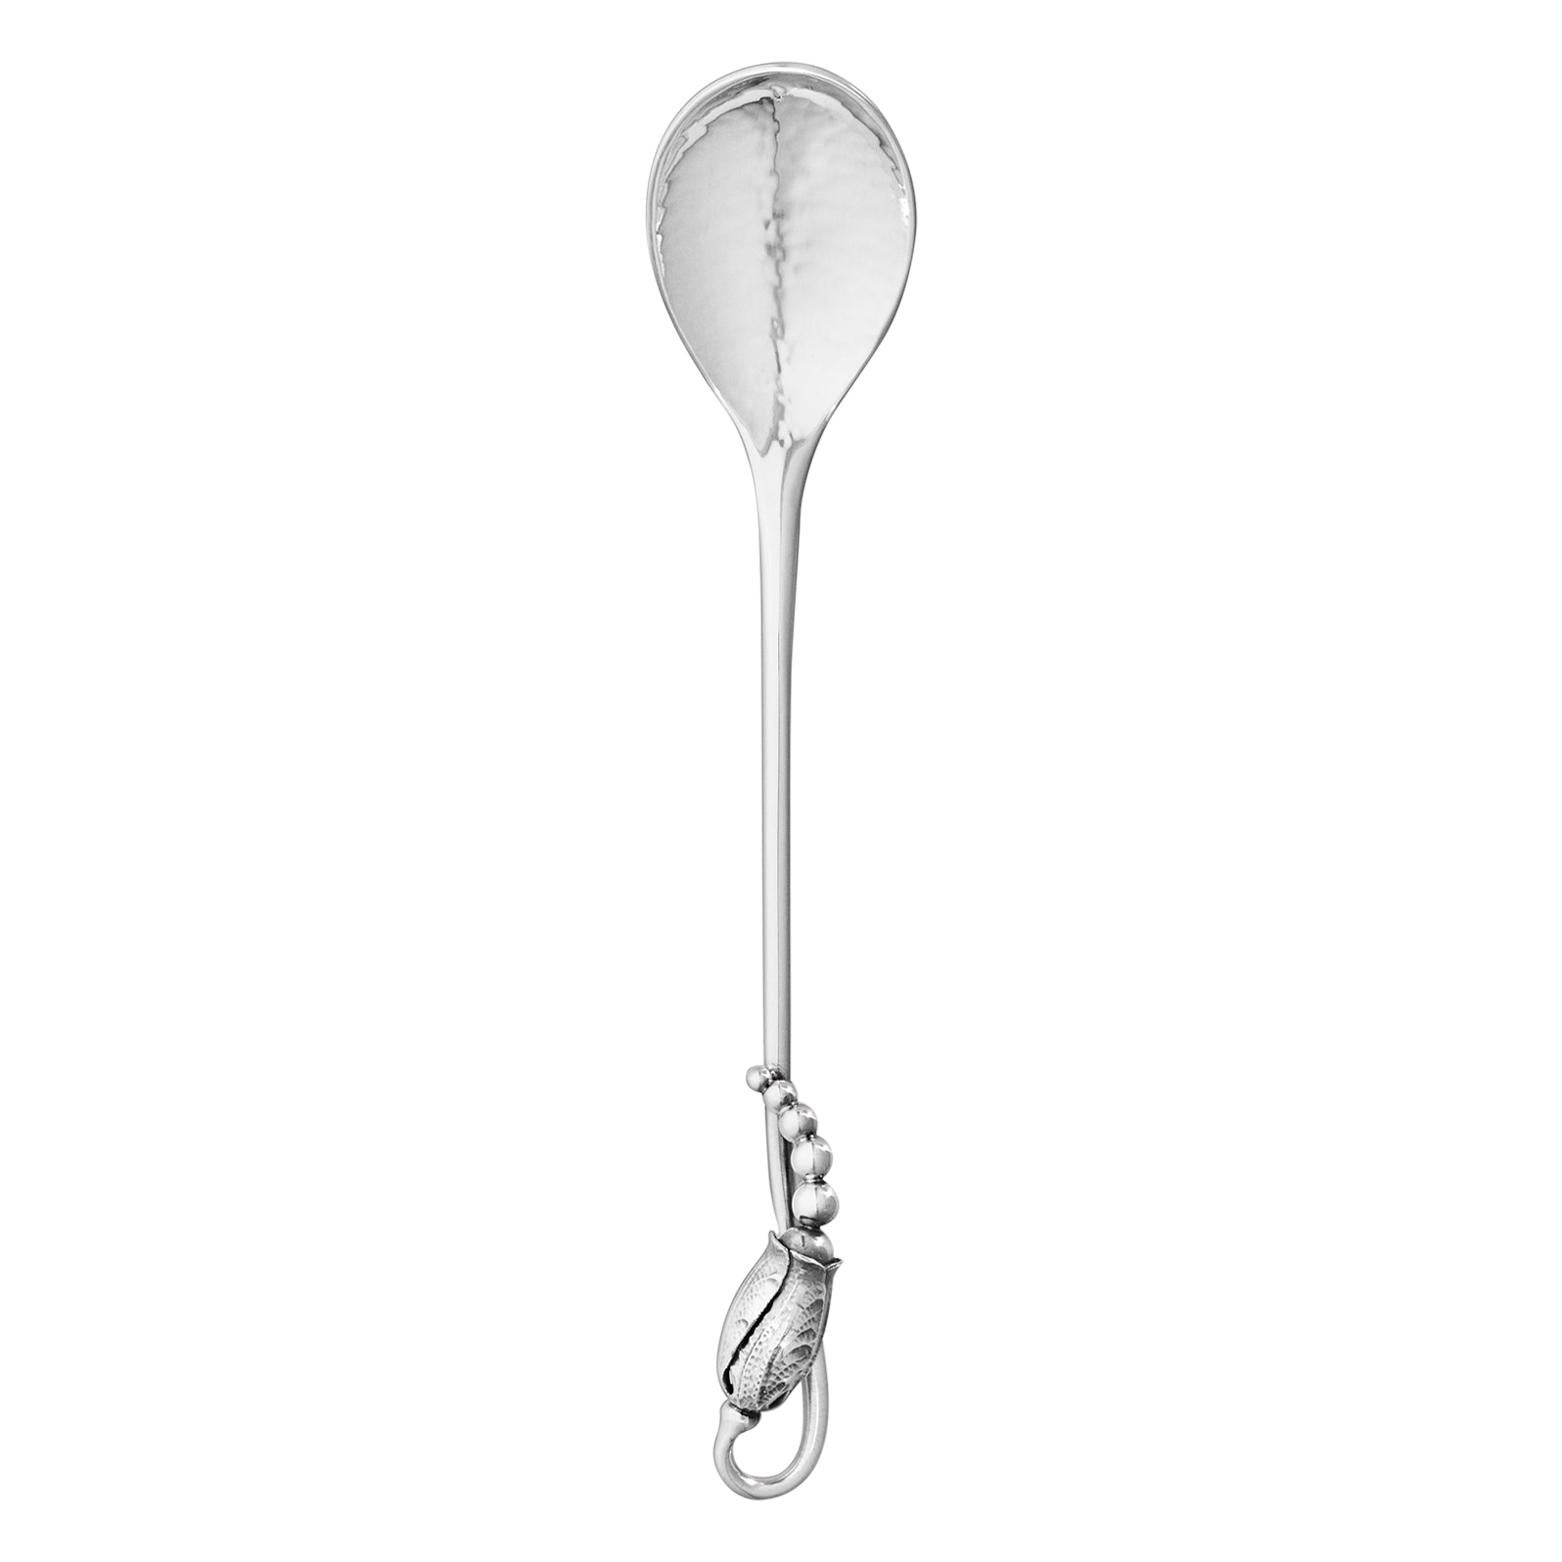 Georg Jensen Handcrafted Sterling Silver Blossom Small Teaspoon